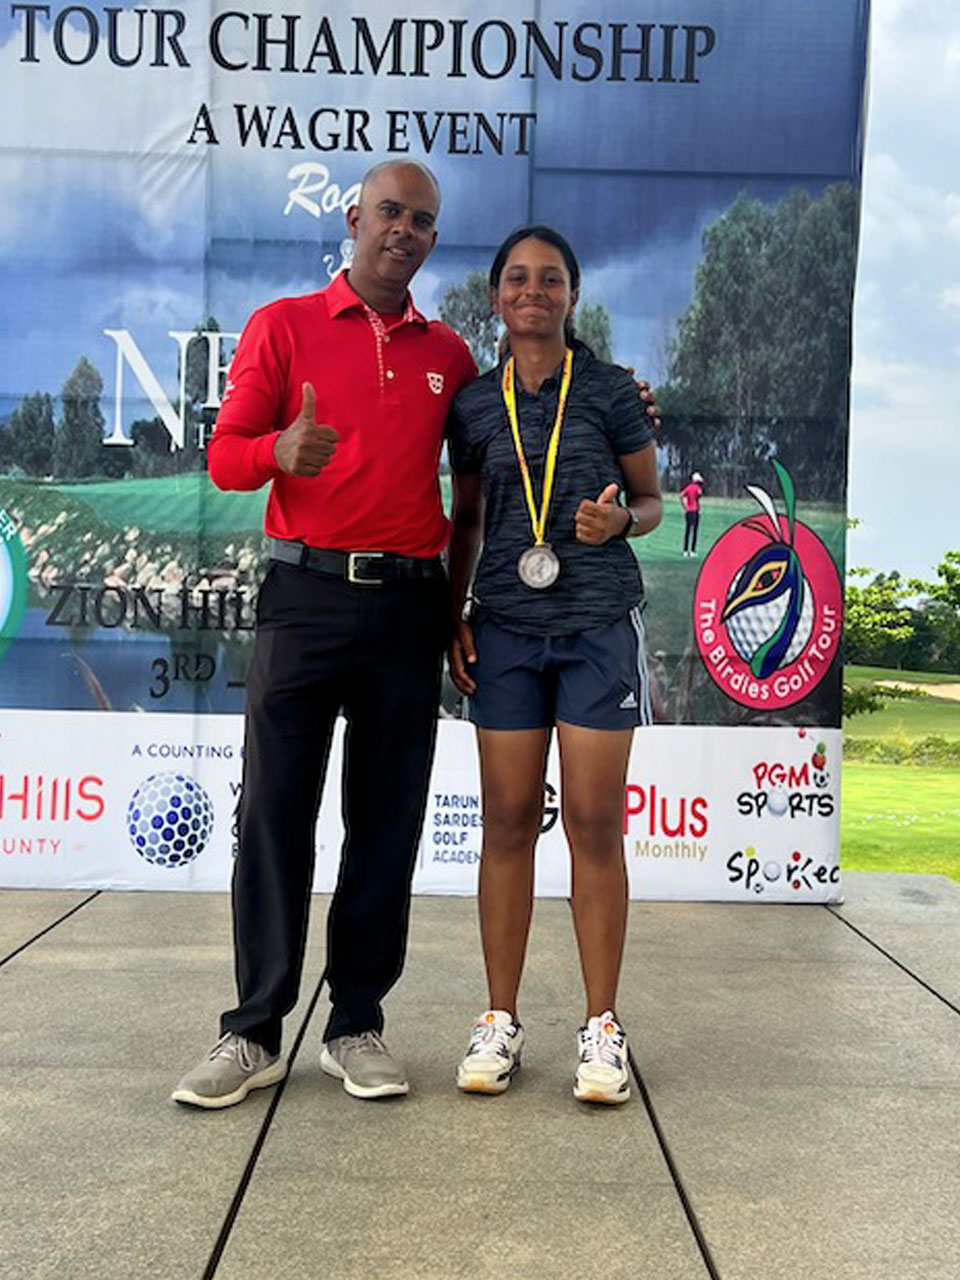 Manvi Singhania finishes 3rd in mixed 14-15 years age category